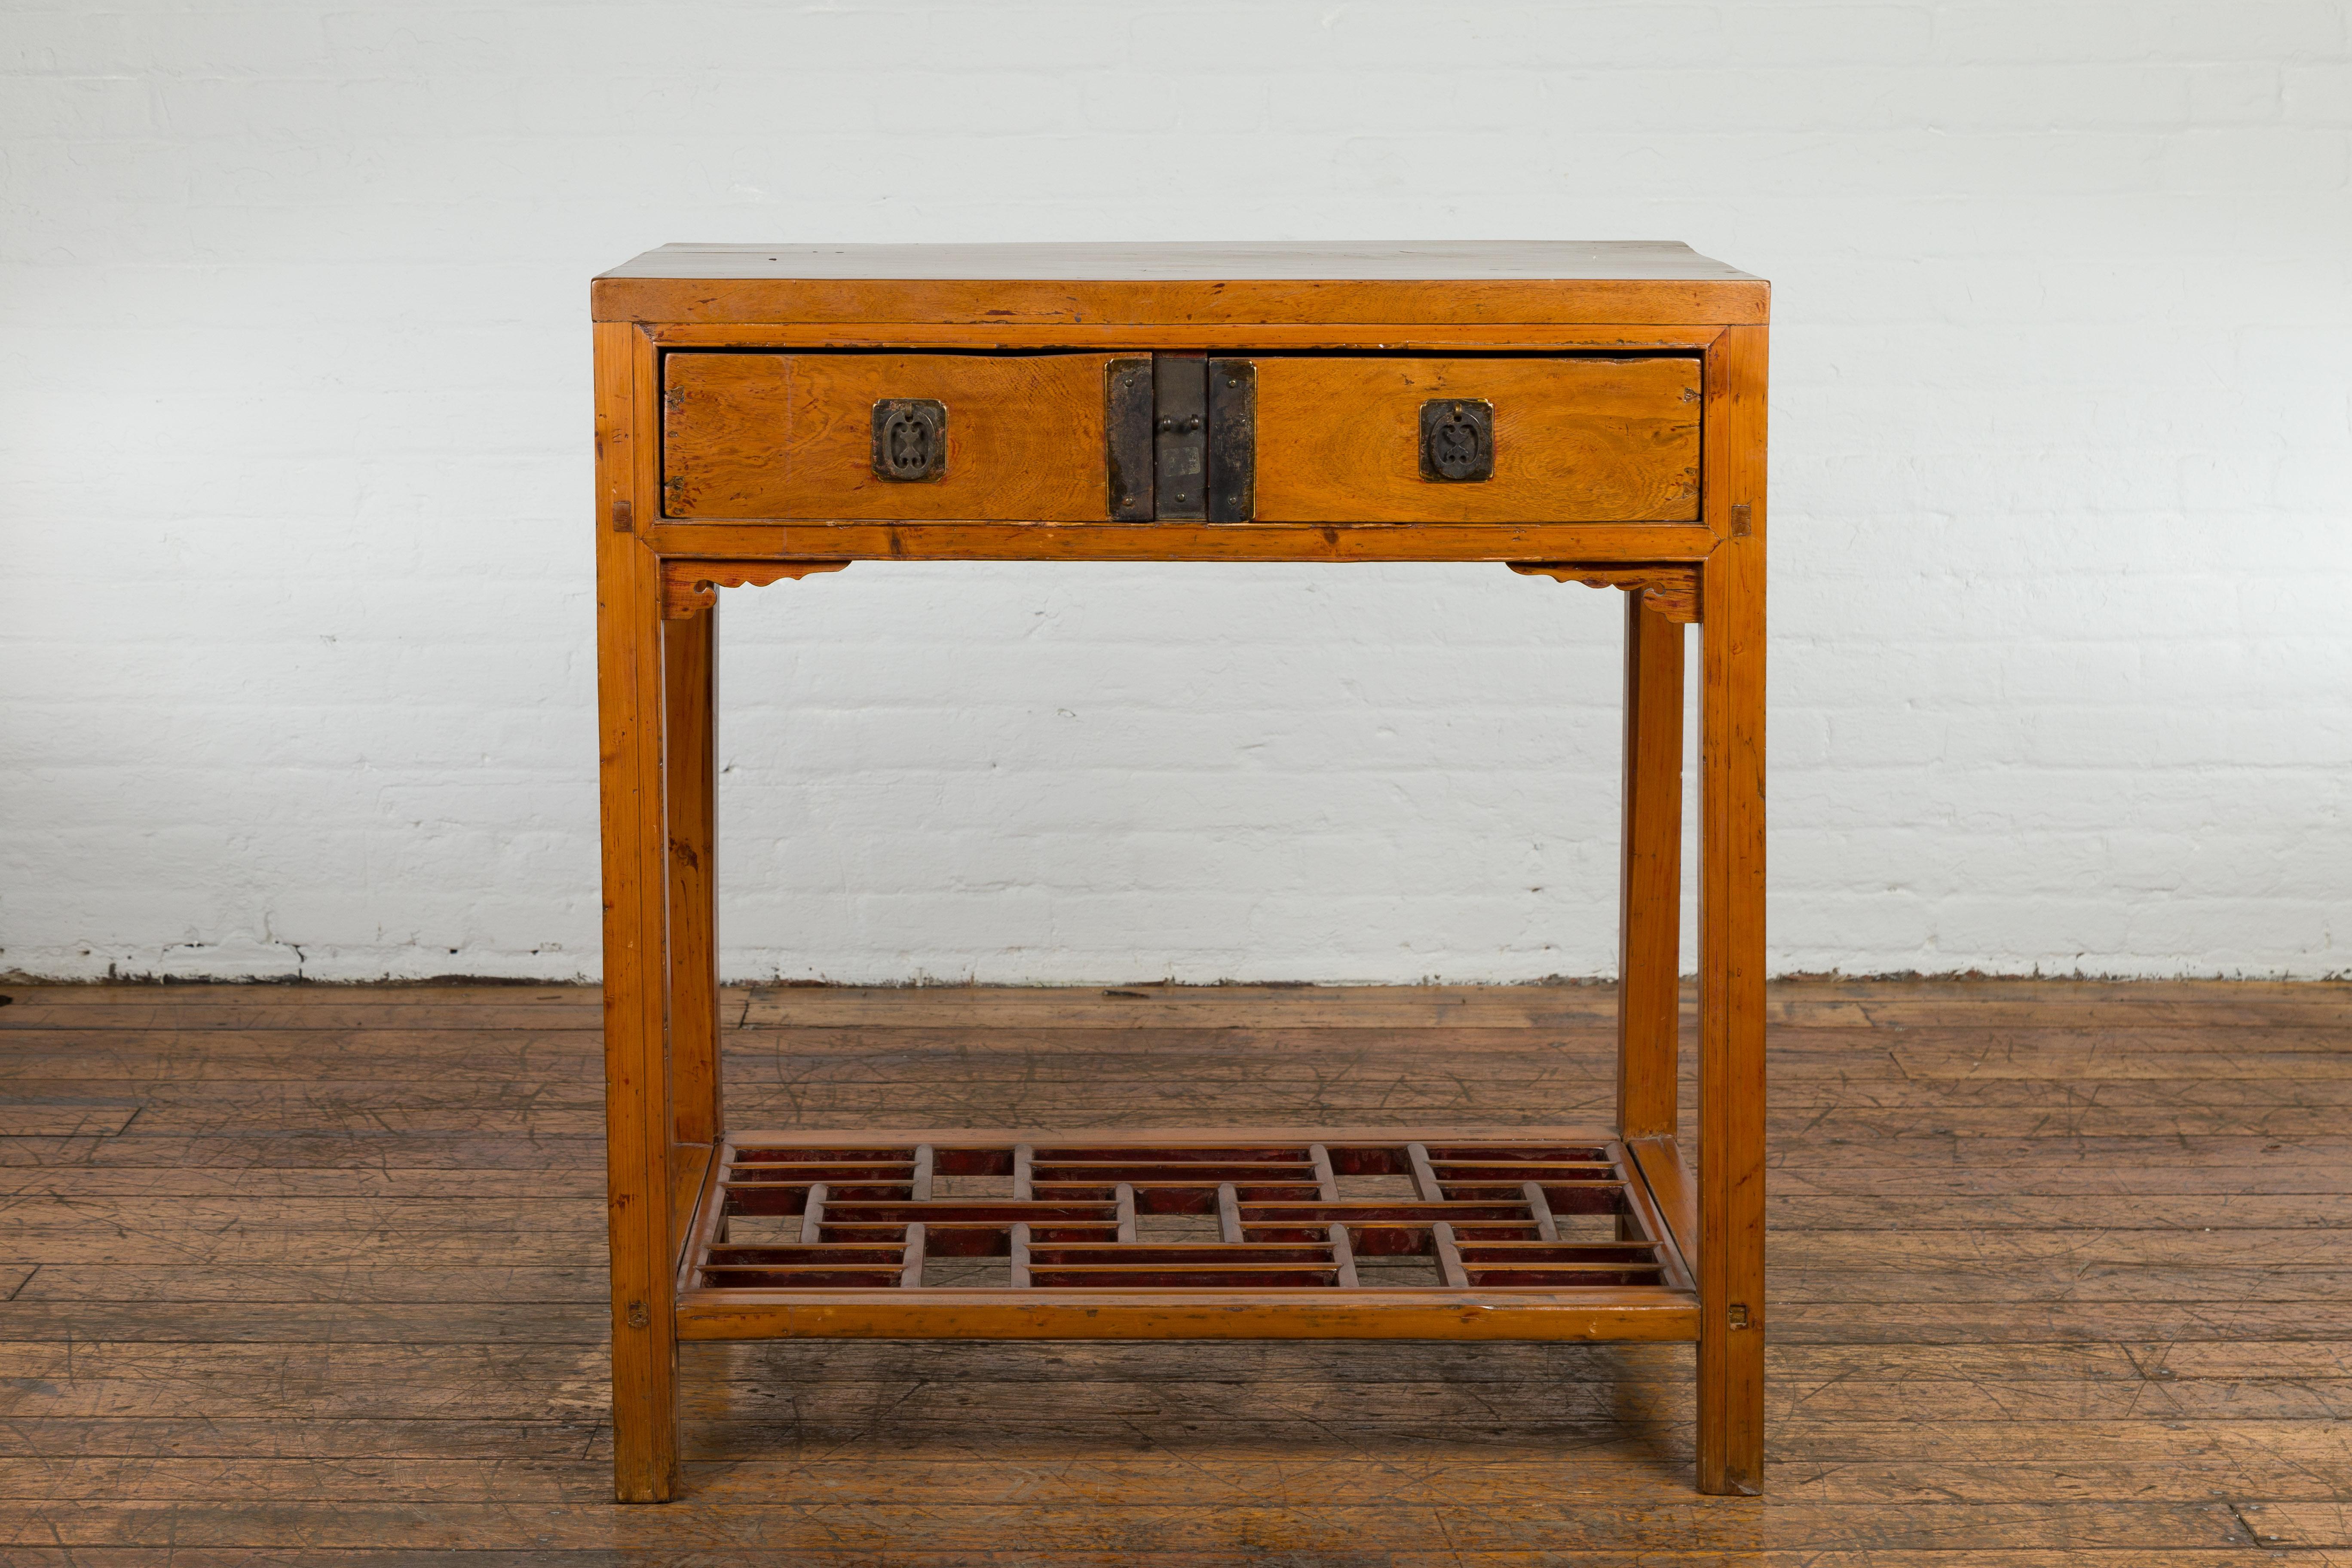 A Chinese Qing Dynasty period altar side console table from the 19th century with two drawers, fretwork shelf and bronze hardware. This 19th-century Qing Dynasty period altar side console table is an exquisite reflection of traditional Chinese